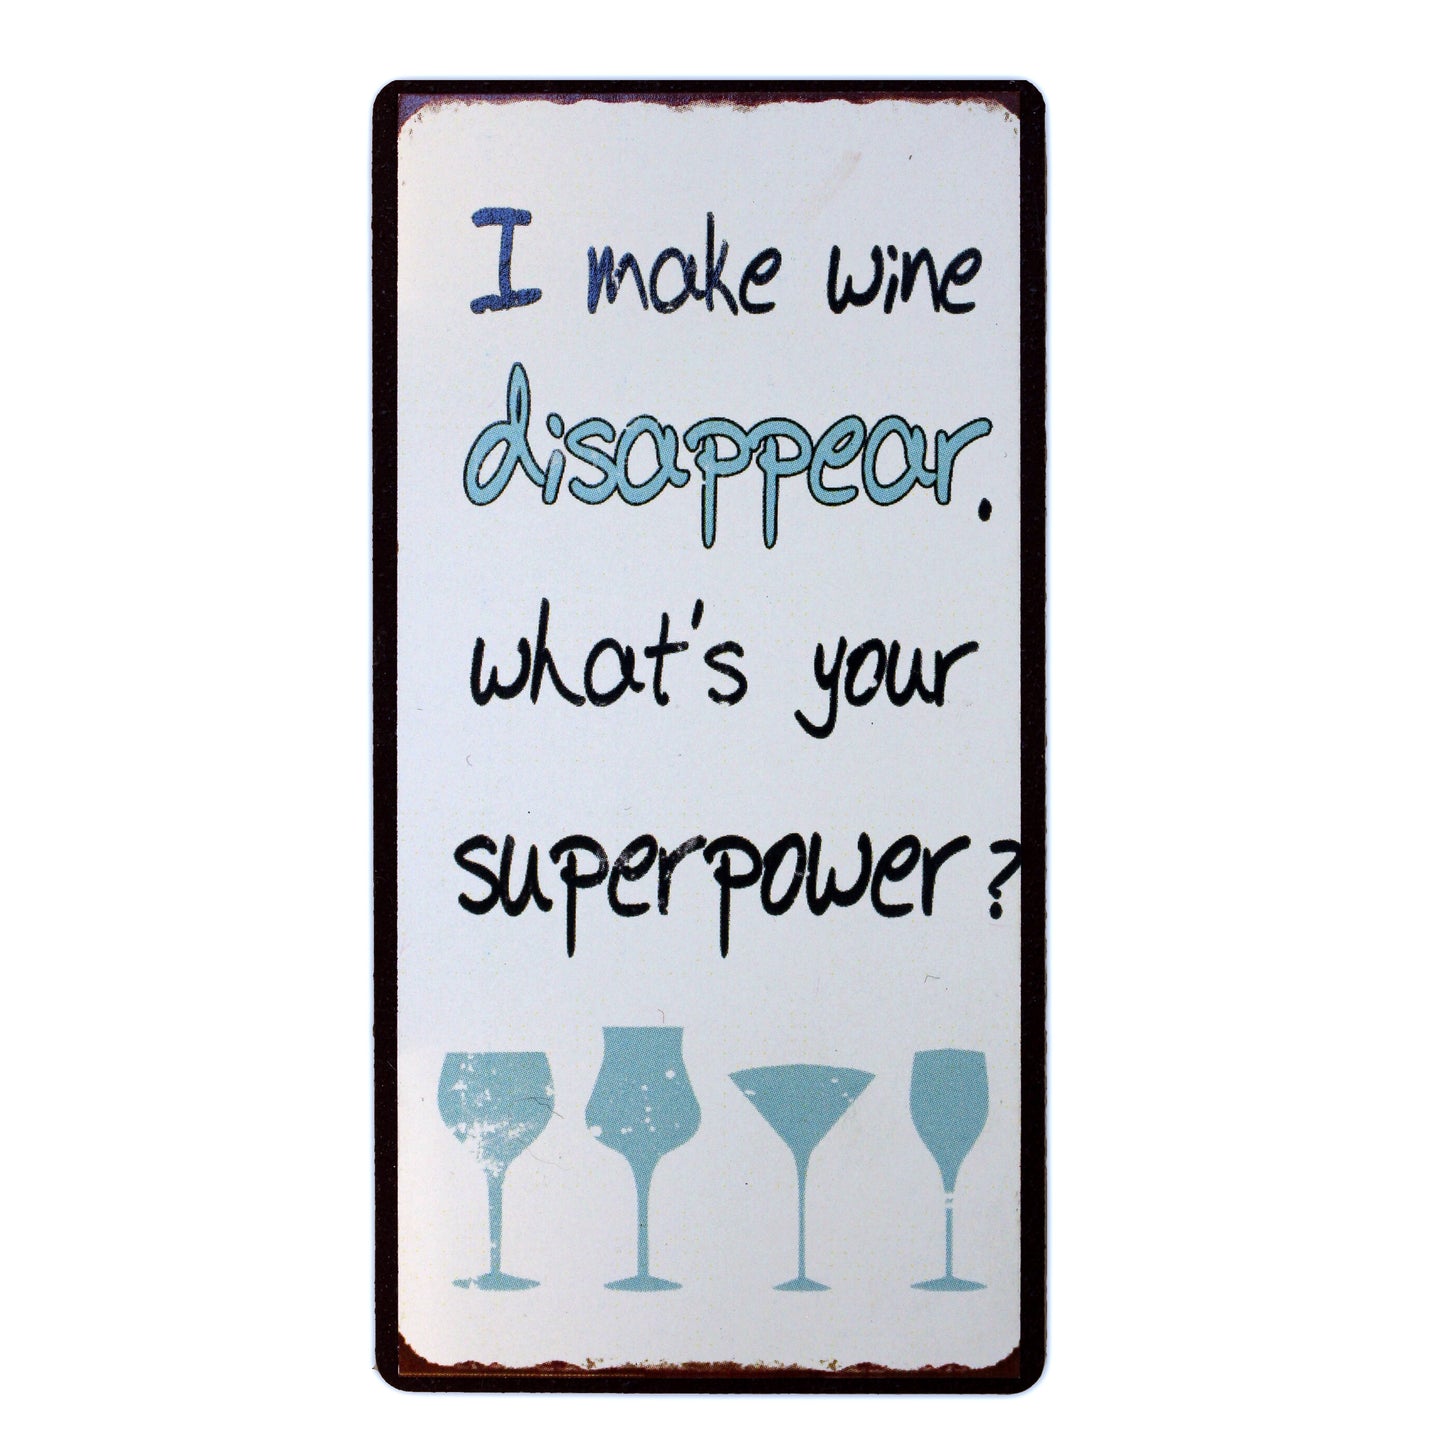 Magnet: I make wine disappear. What's your superpower?